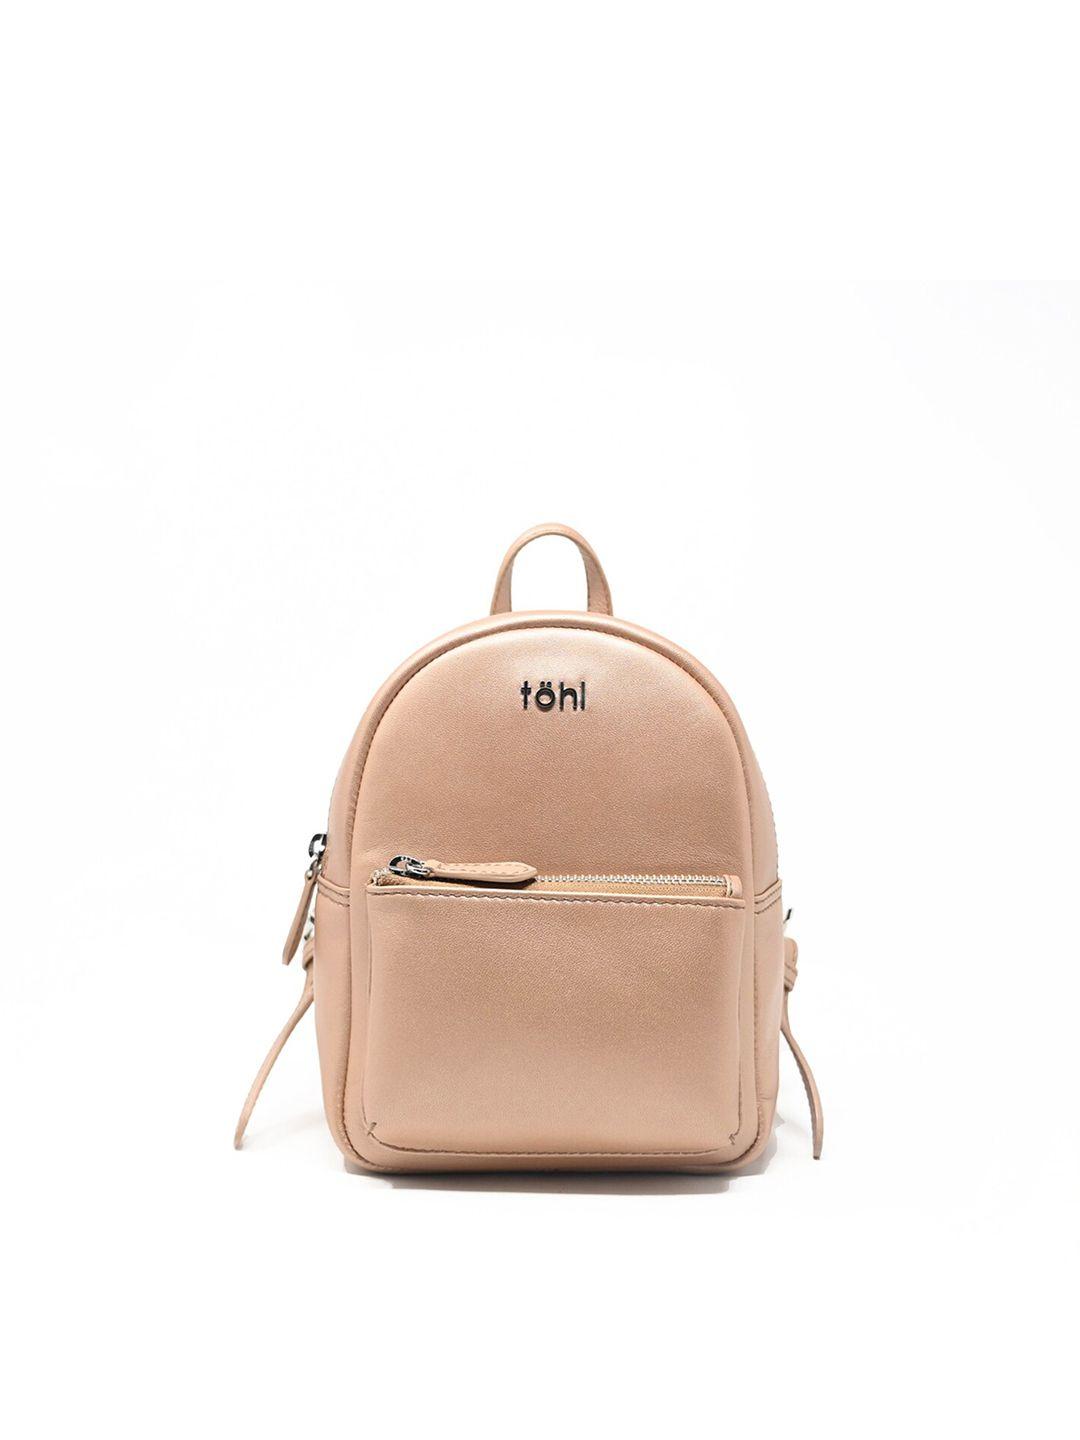 tohl women nude backpack